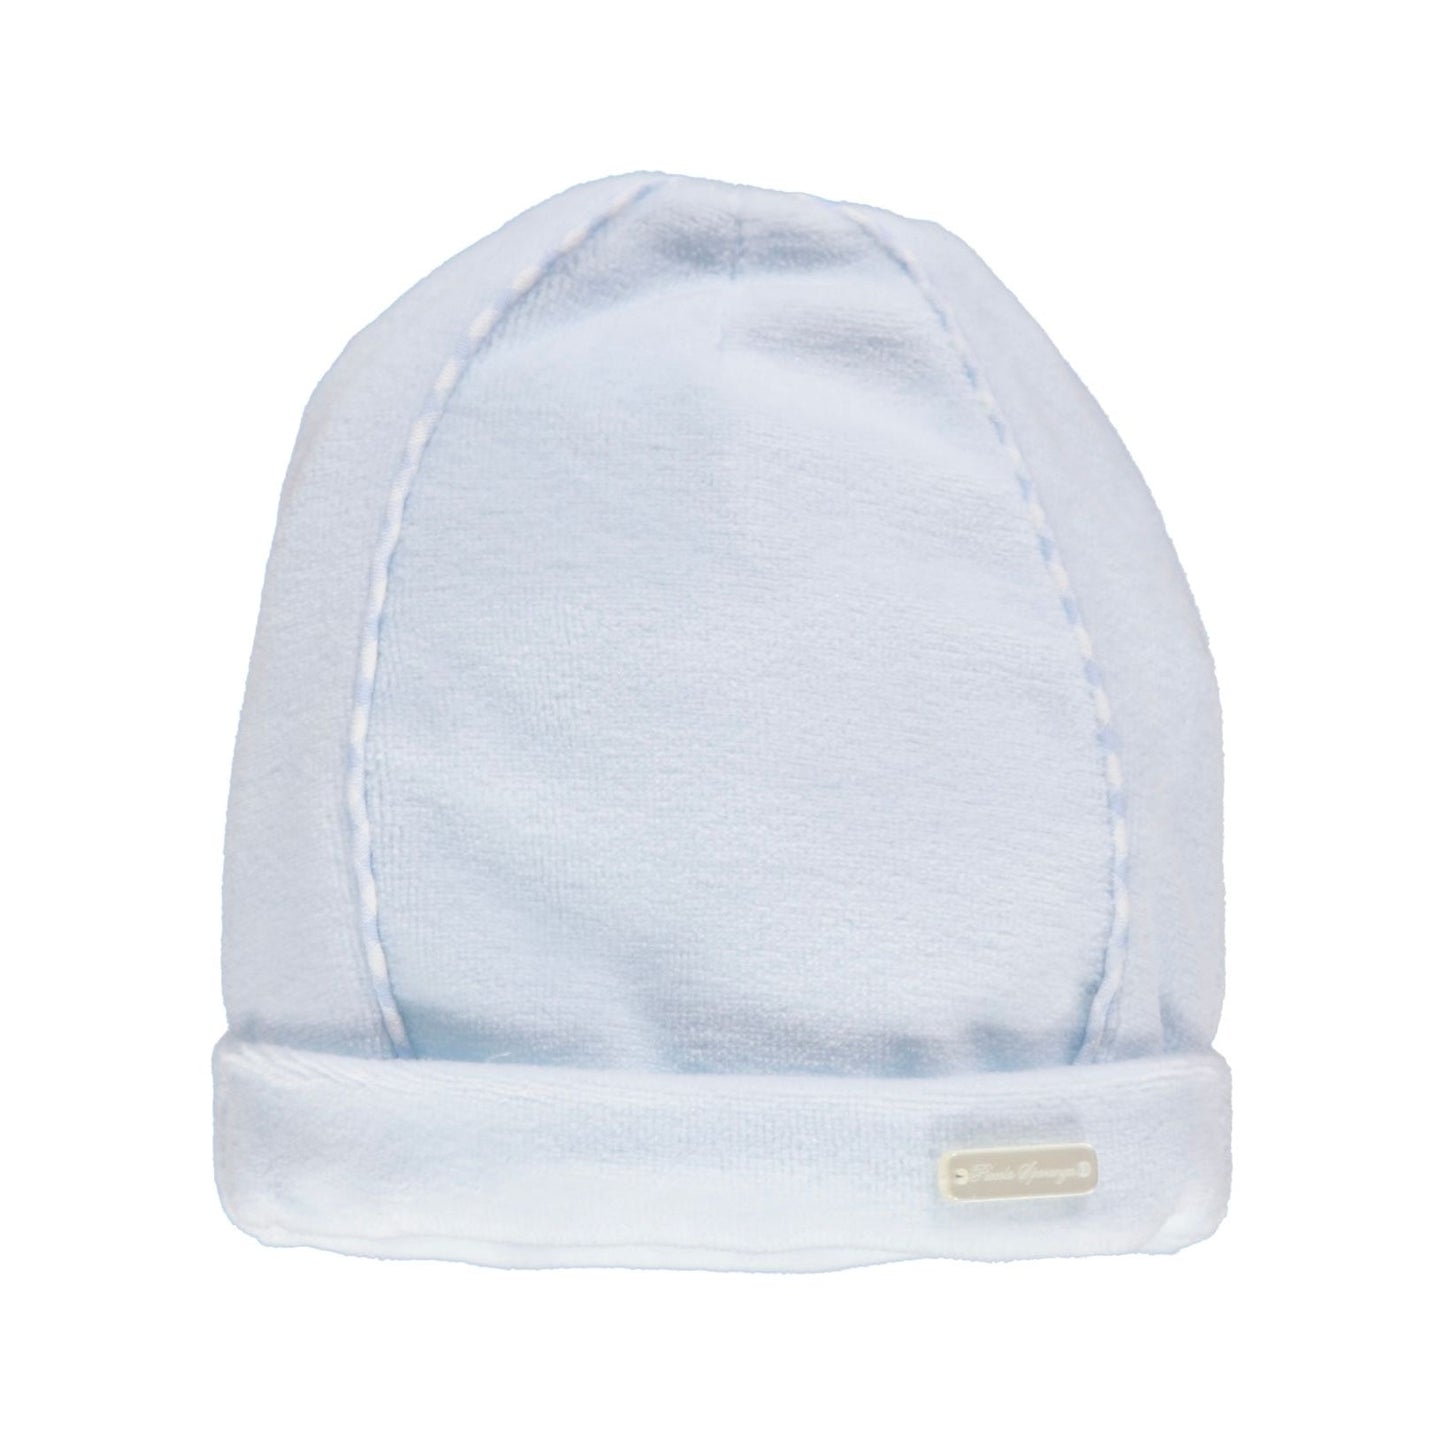 Pale blue hat for baby boys